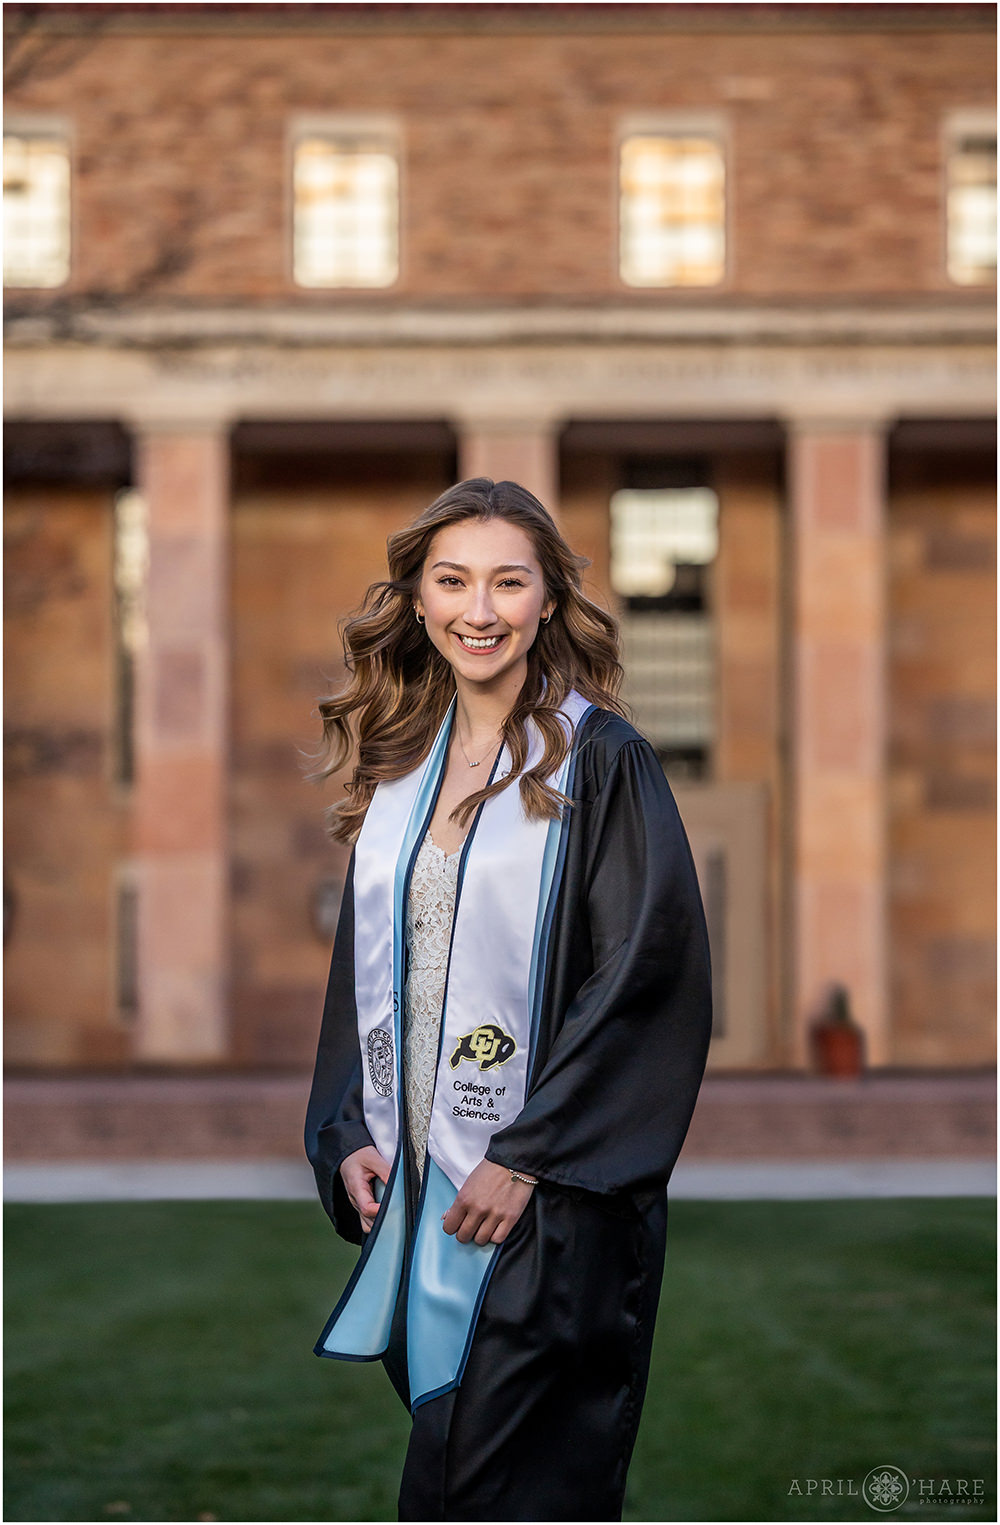 Graduation Photography Session with Gown in front of the Norlin library at CU Boulder Campus